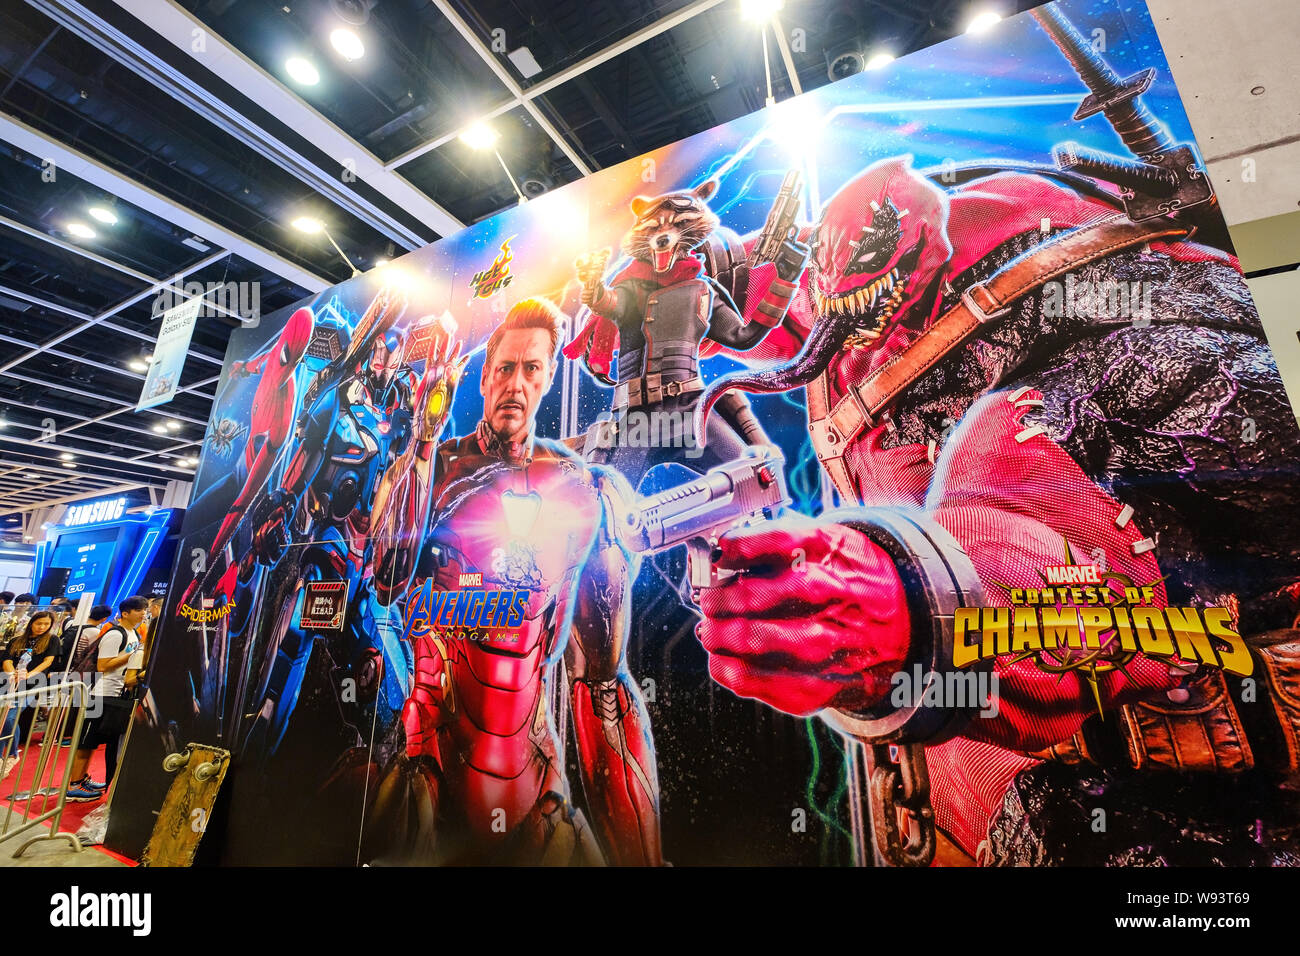 Hong Kong - July 30, 2019: Marvel movie backdrop display with cartoon characters Exhibition activity the 21th ACGHK2019 Ani-Com & Games event in Hong Stock Photo